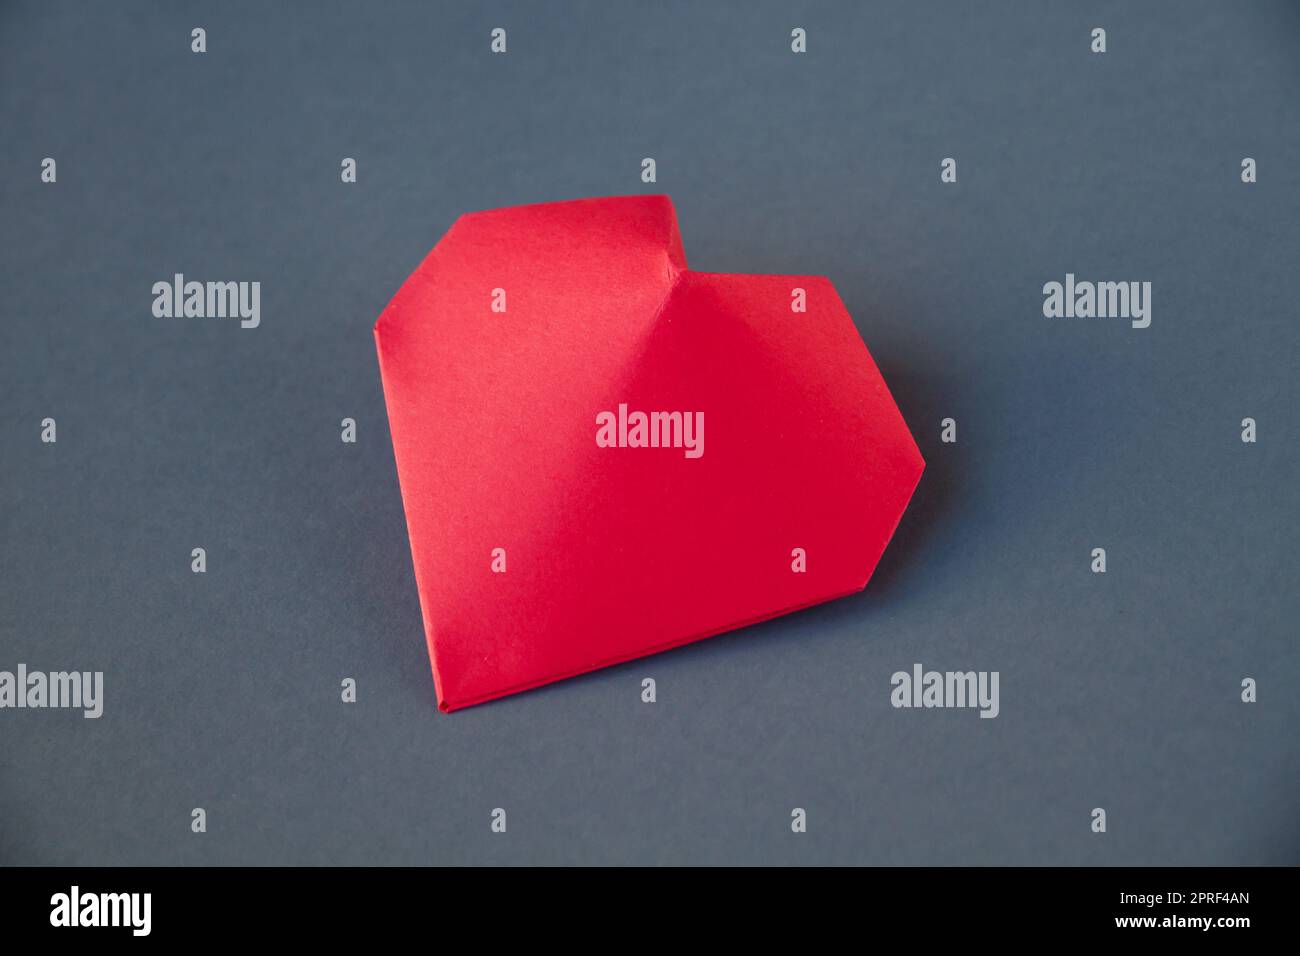 Red paper heart origami isolated on a grey background Stock Photo